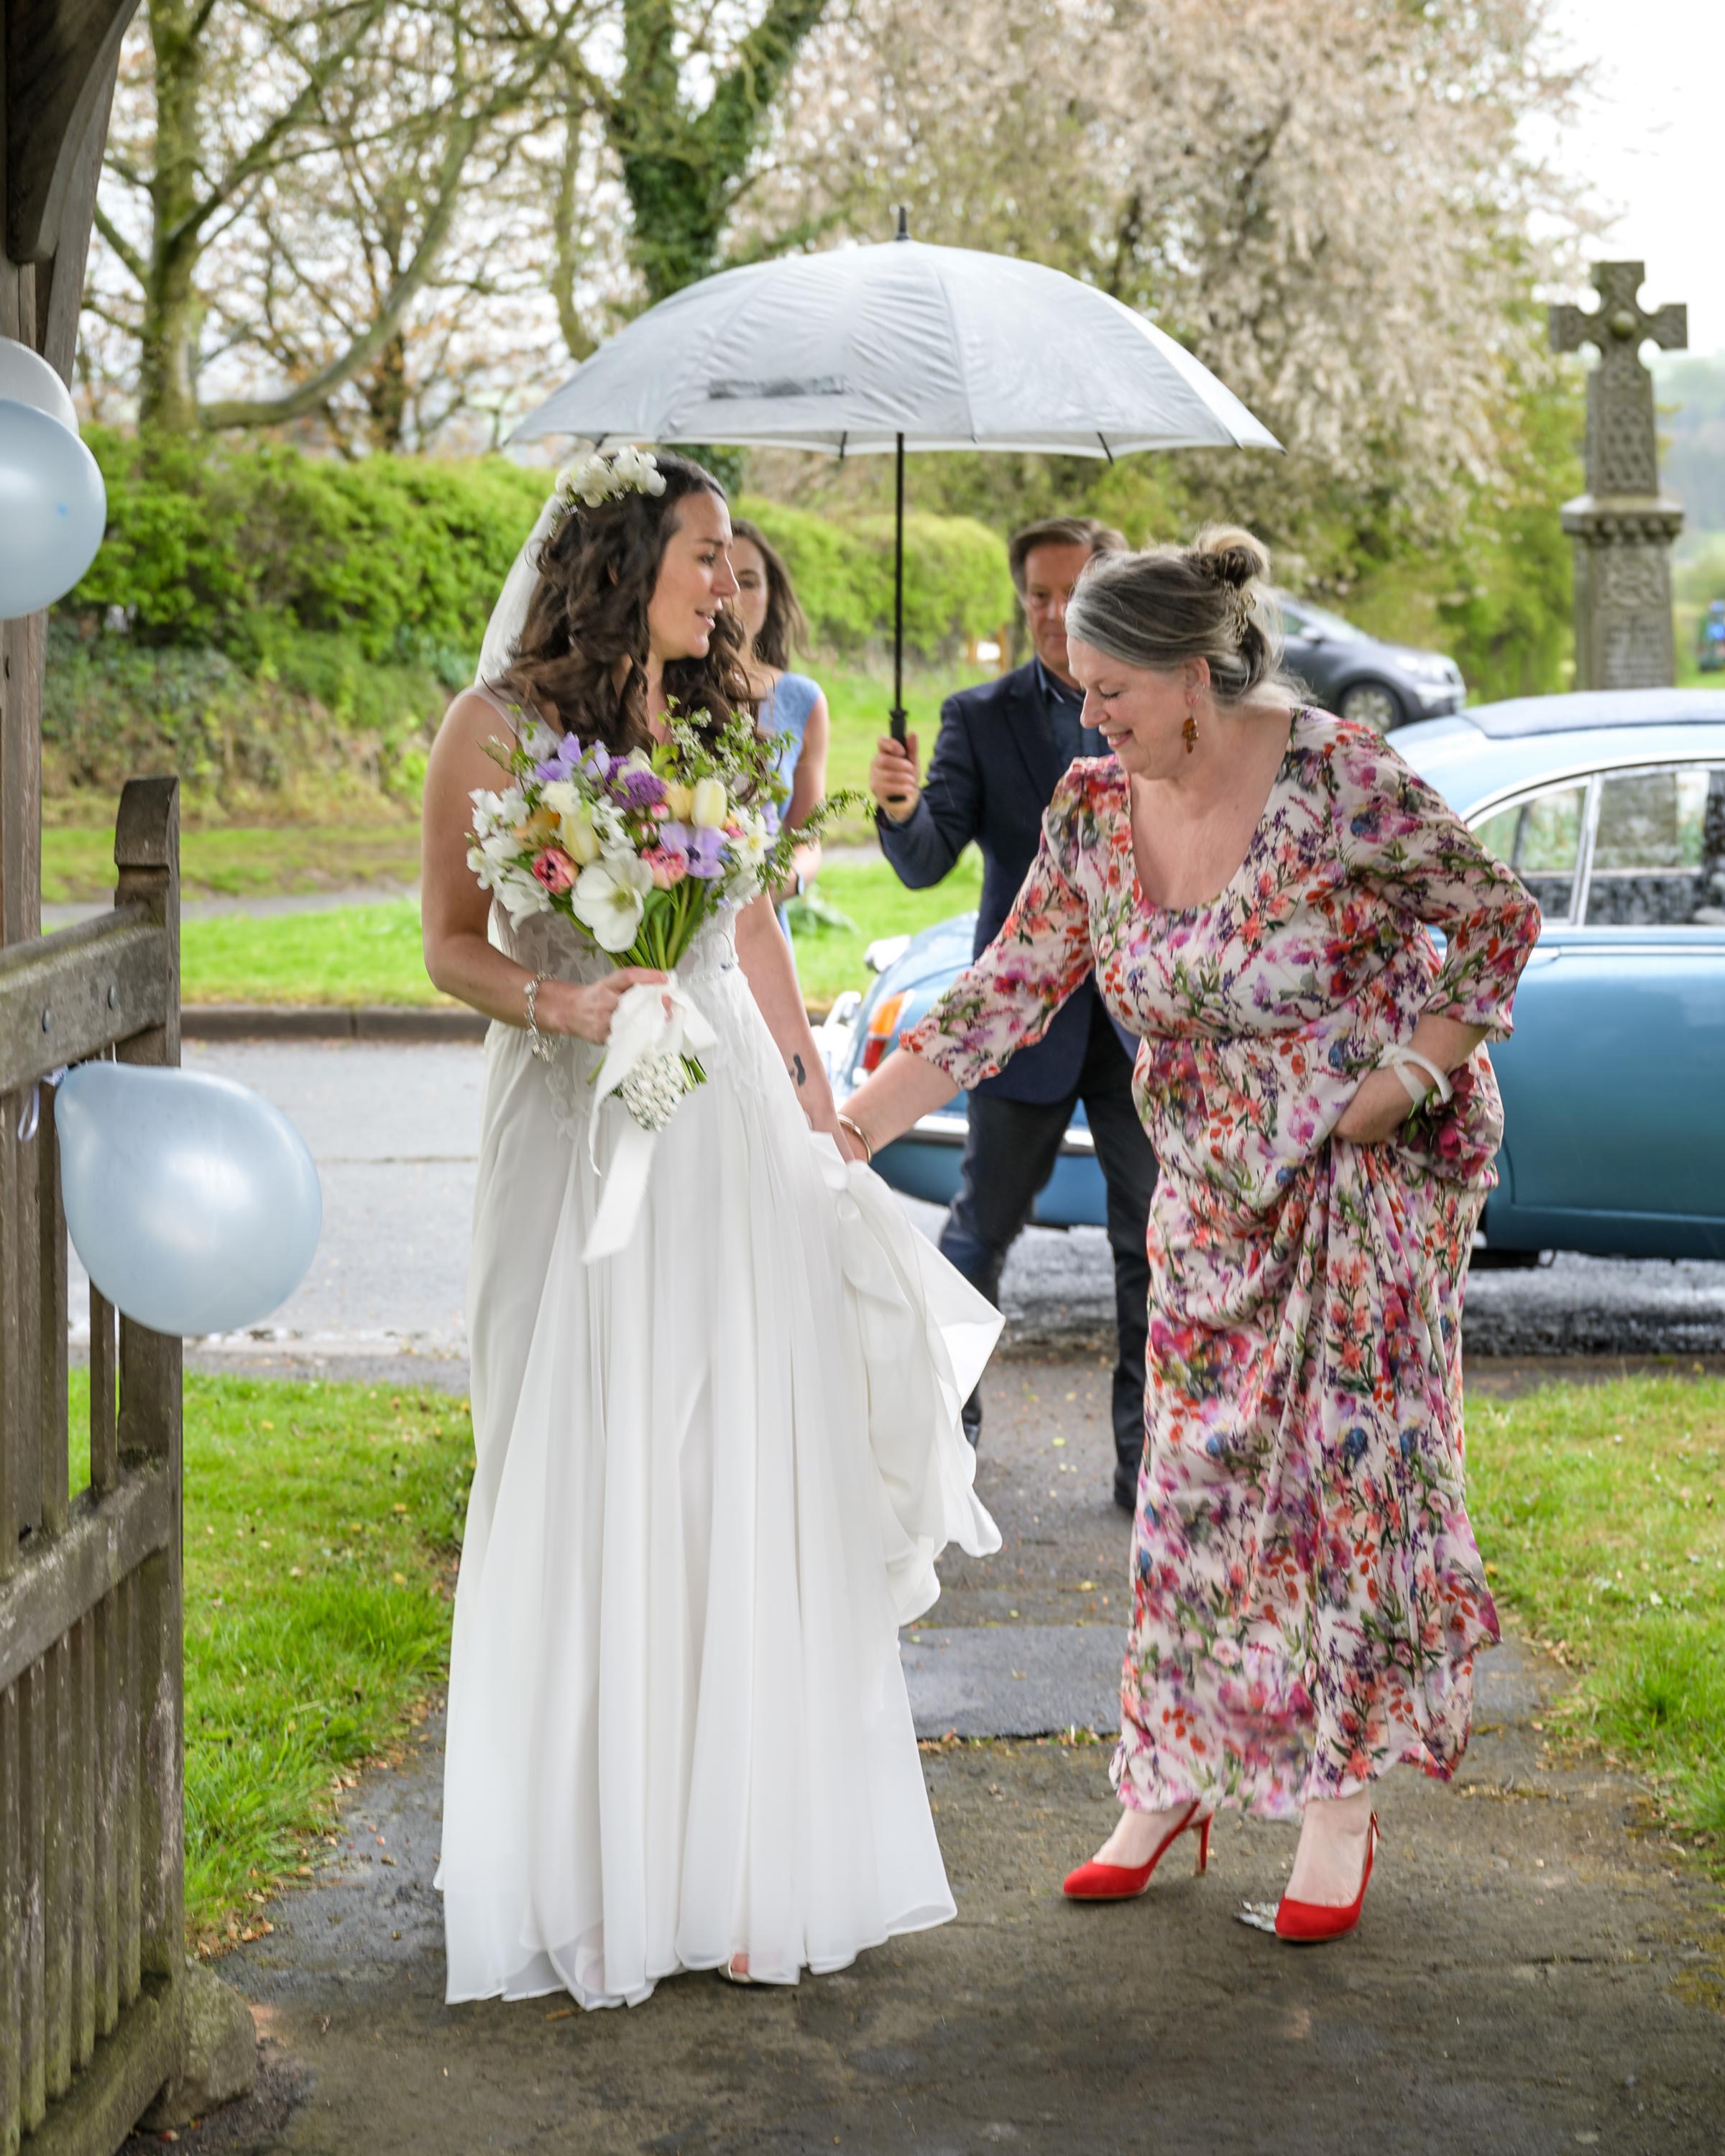 Wedding of Emily Parson and Damian Woolfe Photo by Simon Hughes Photography